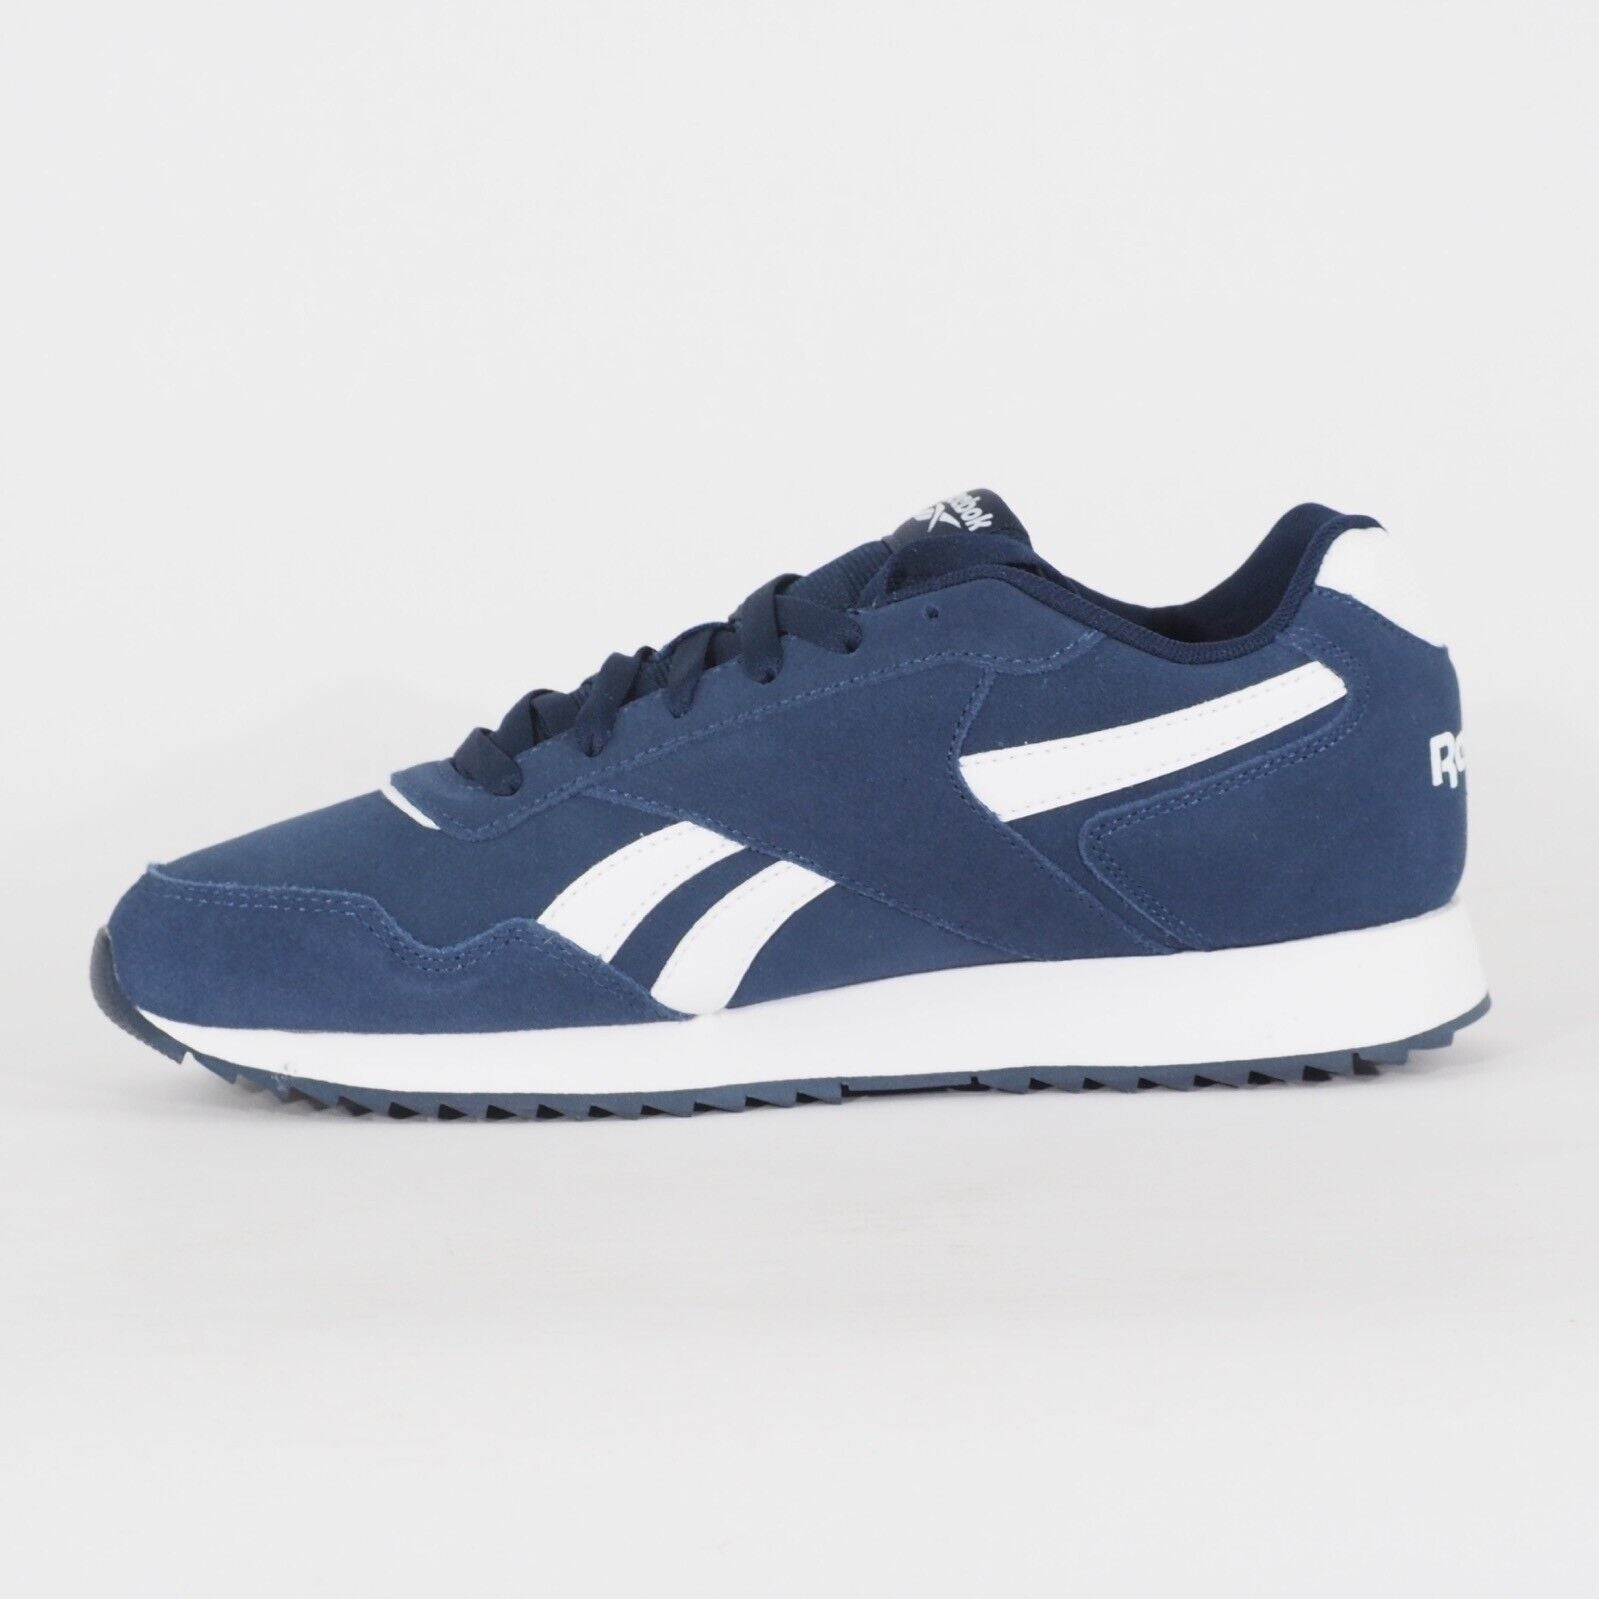 Reebok Glide Ripple GZ5215 Navy Course A Pied Lace Up Suede Navy White Trainers